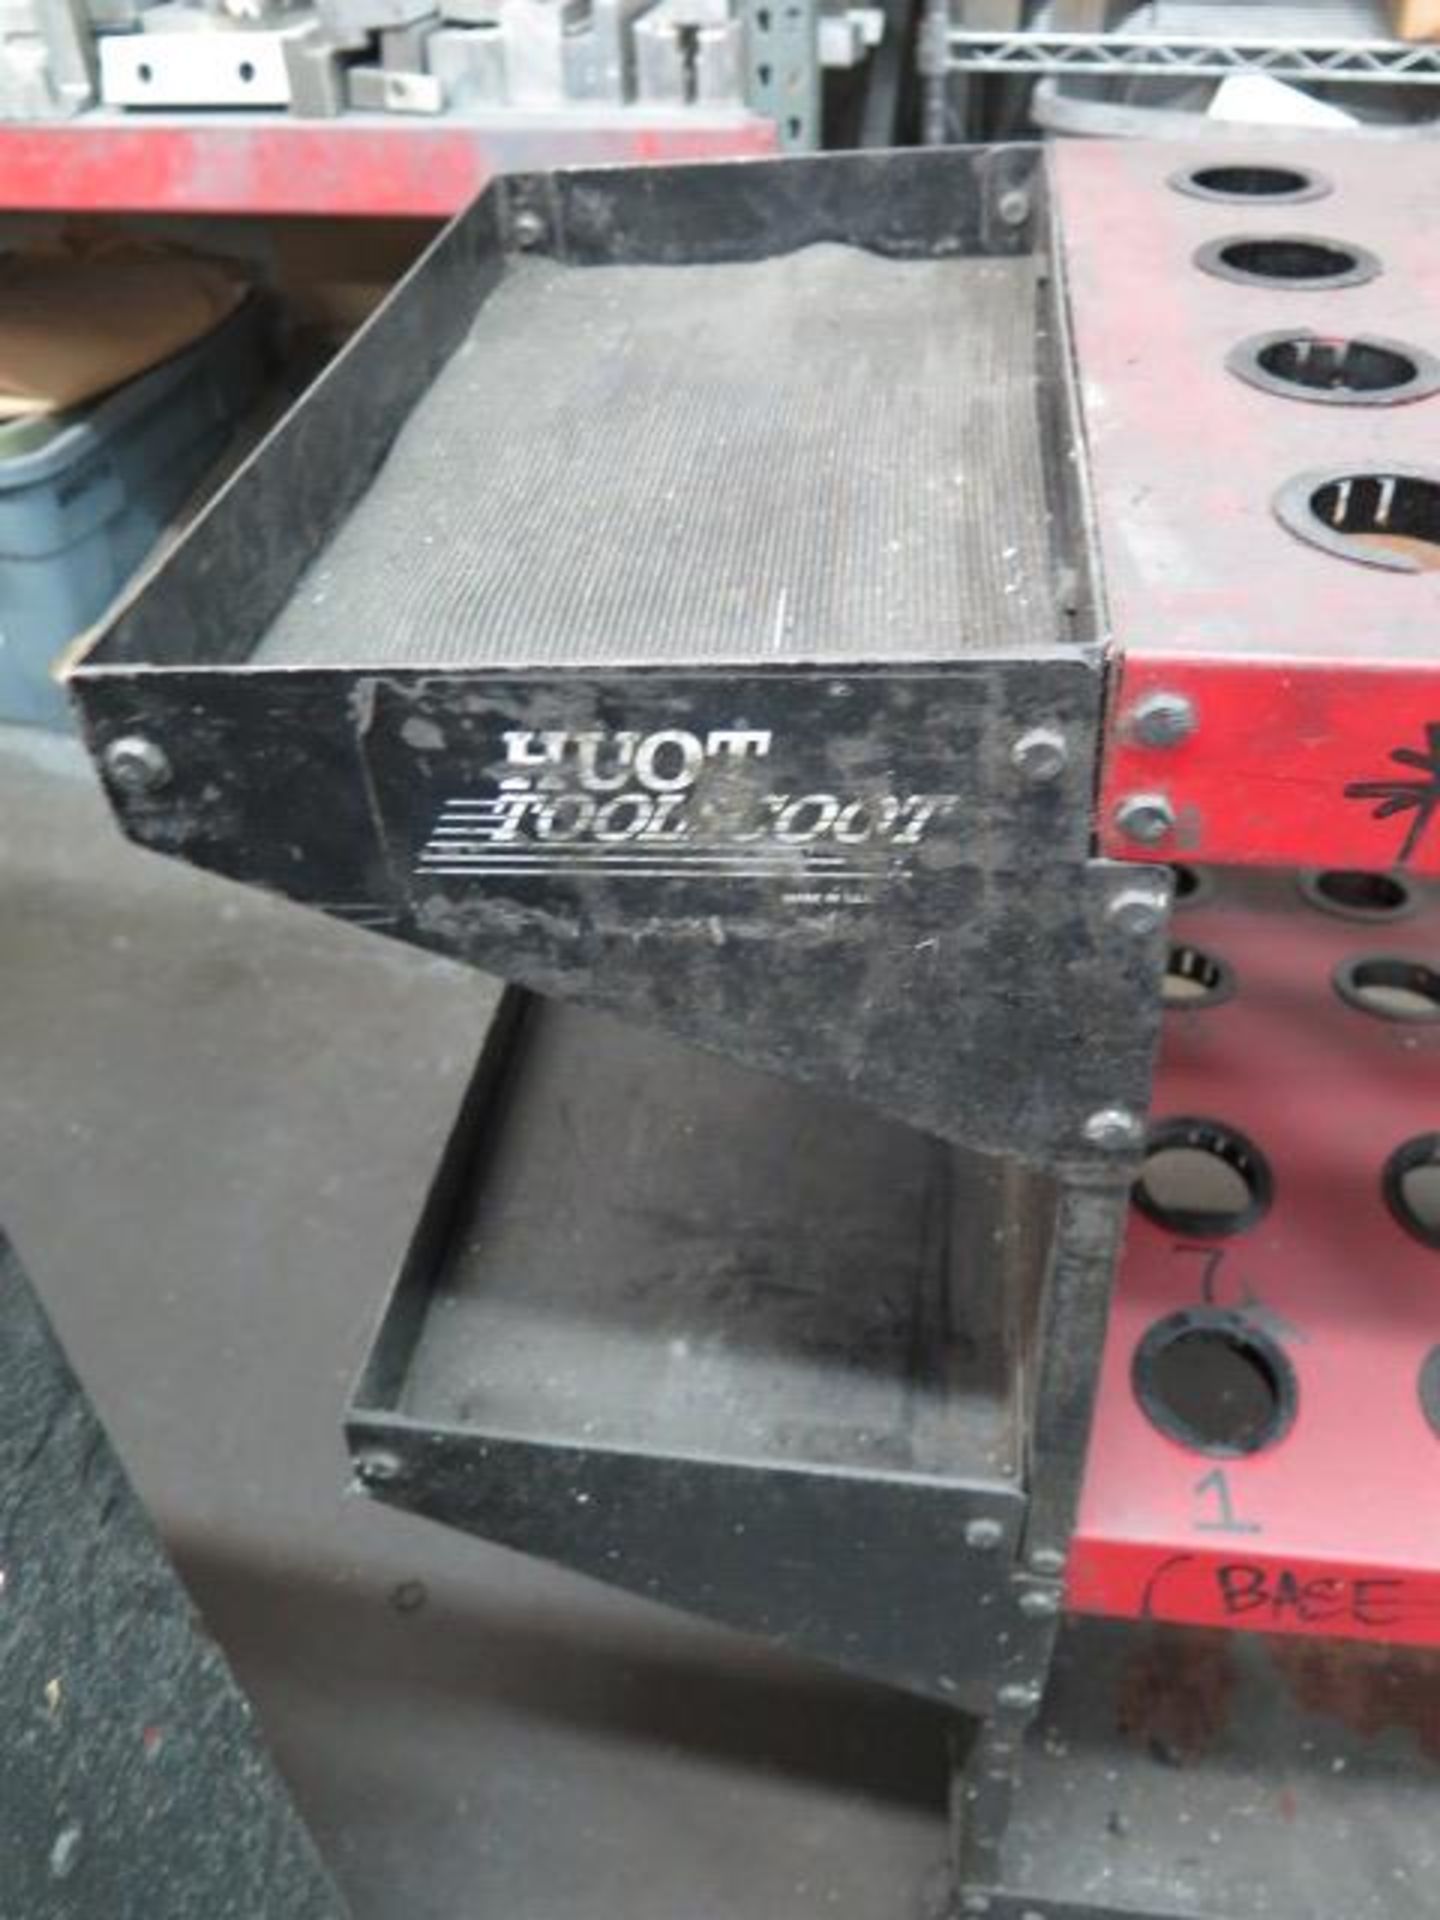 Huot Toolscoot 40-Taper Tooling Cart (SOLD AS-IS - NO WARRANTY) - Image 5 of 5